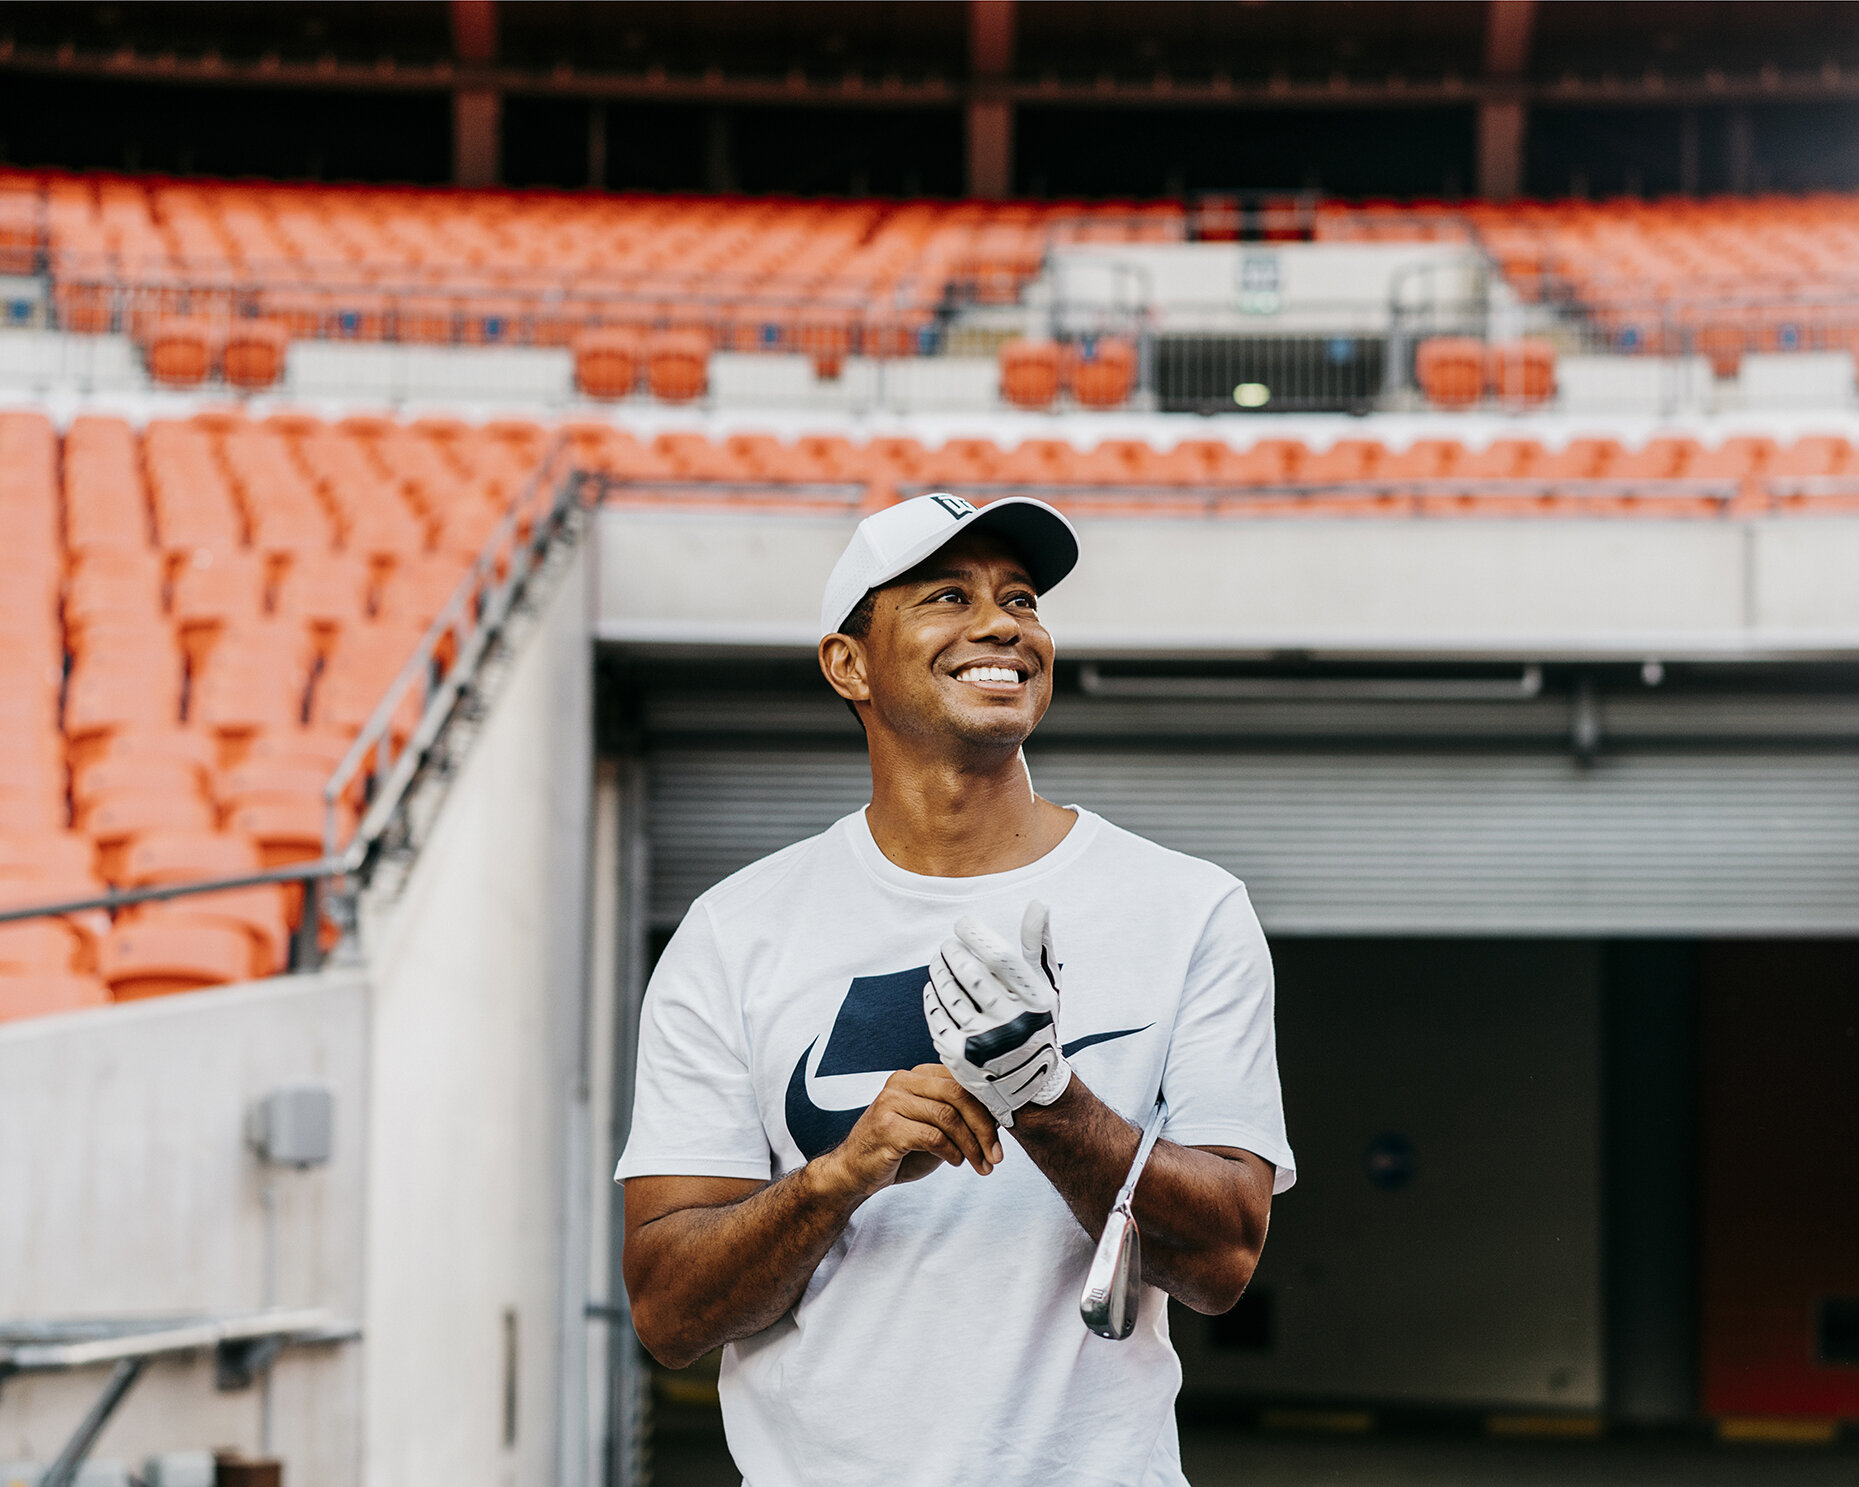 Nike x Tiger Woods. The Wembley Open 